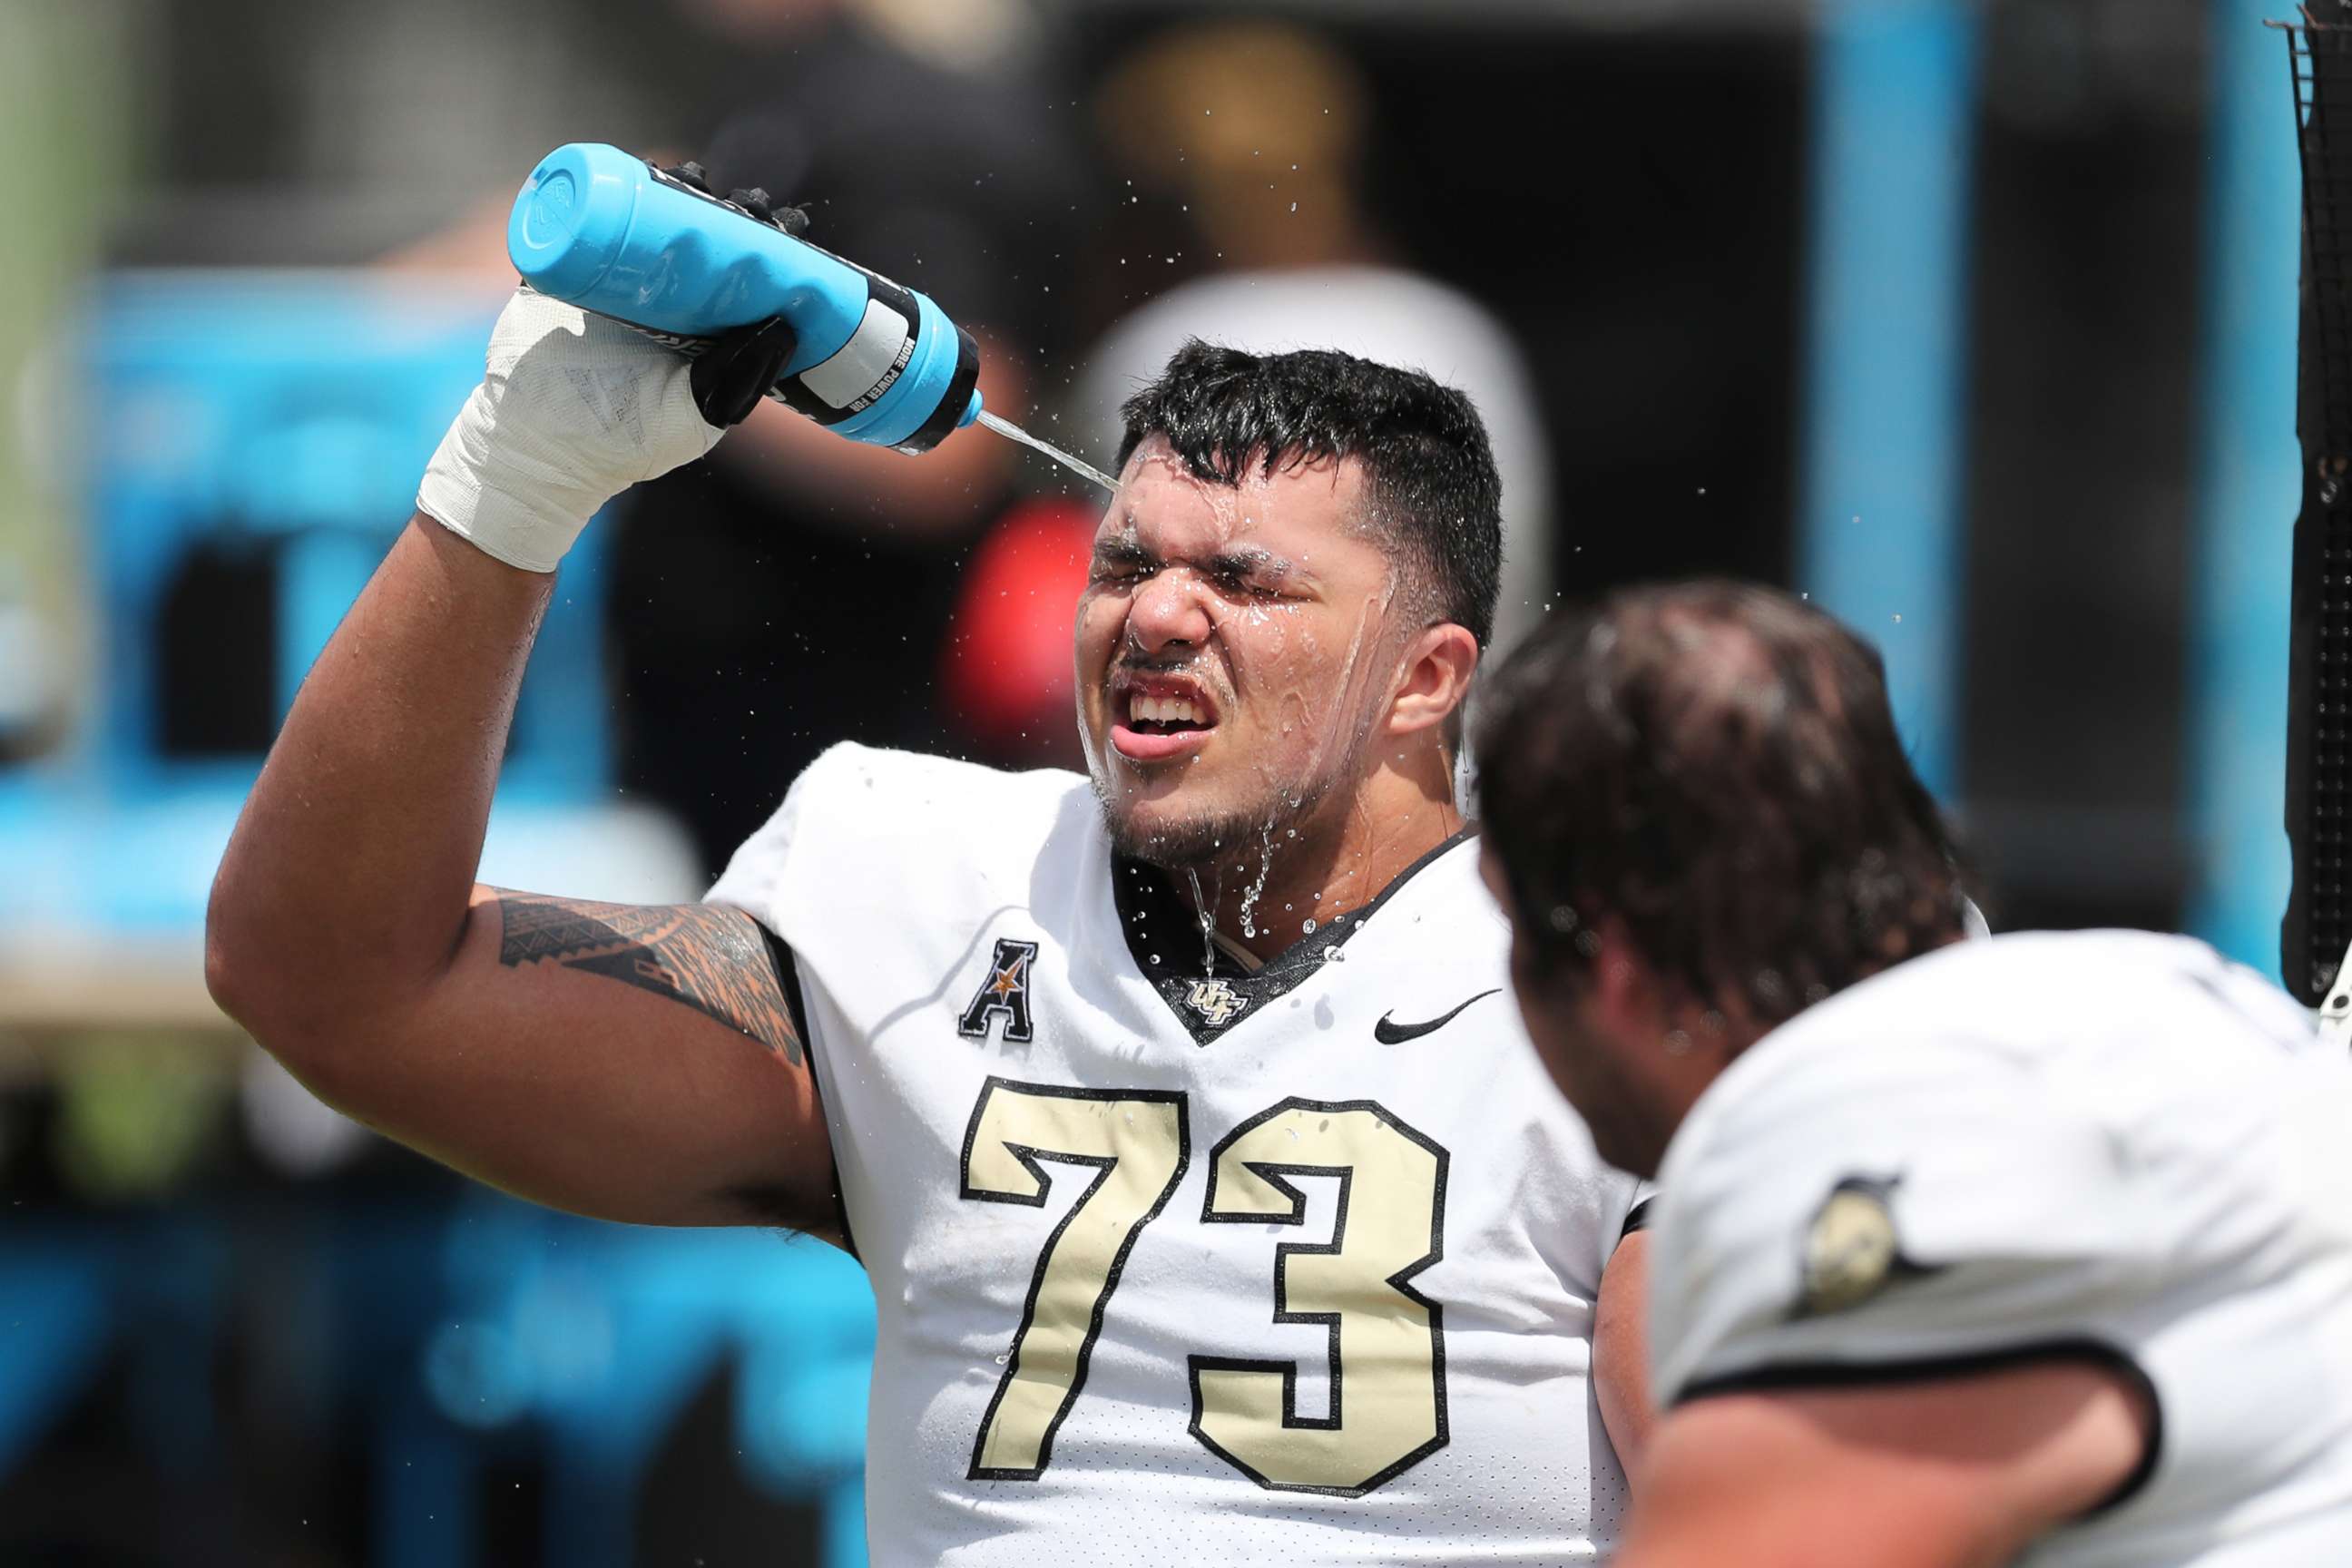 PHOTO: An offensive lineman of the UCF Knights sprays himself to cool off from the heat during the UCF Spring Game at the Bounce House on April 16, 2022 in Orlando, Fla. 